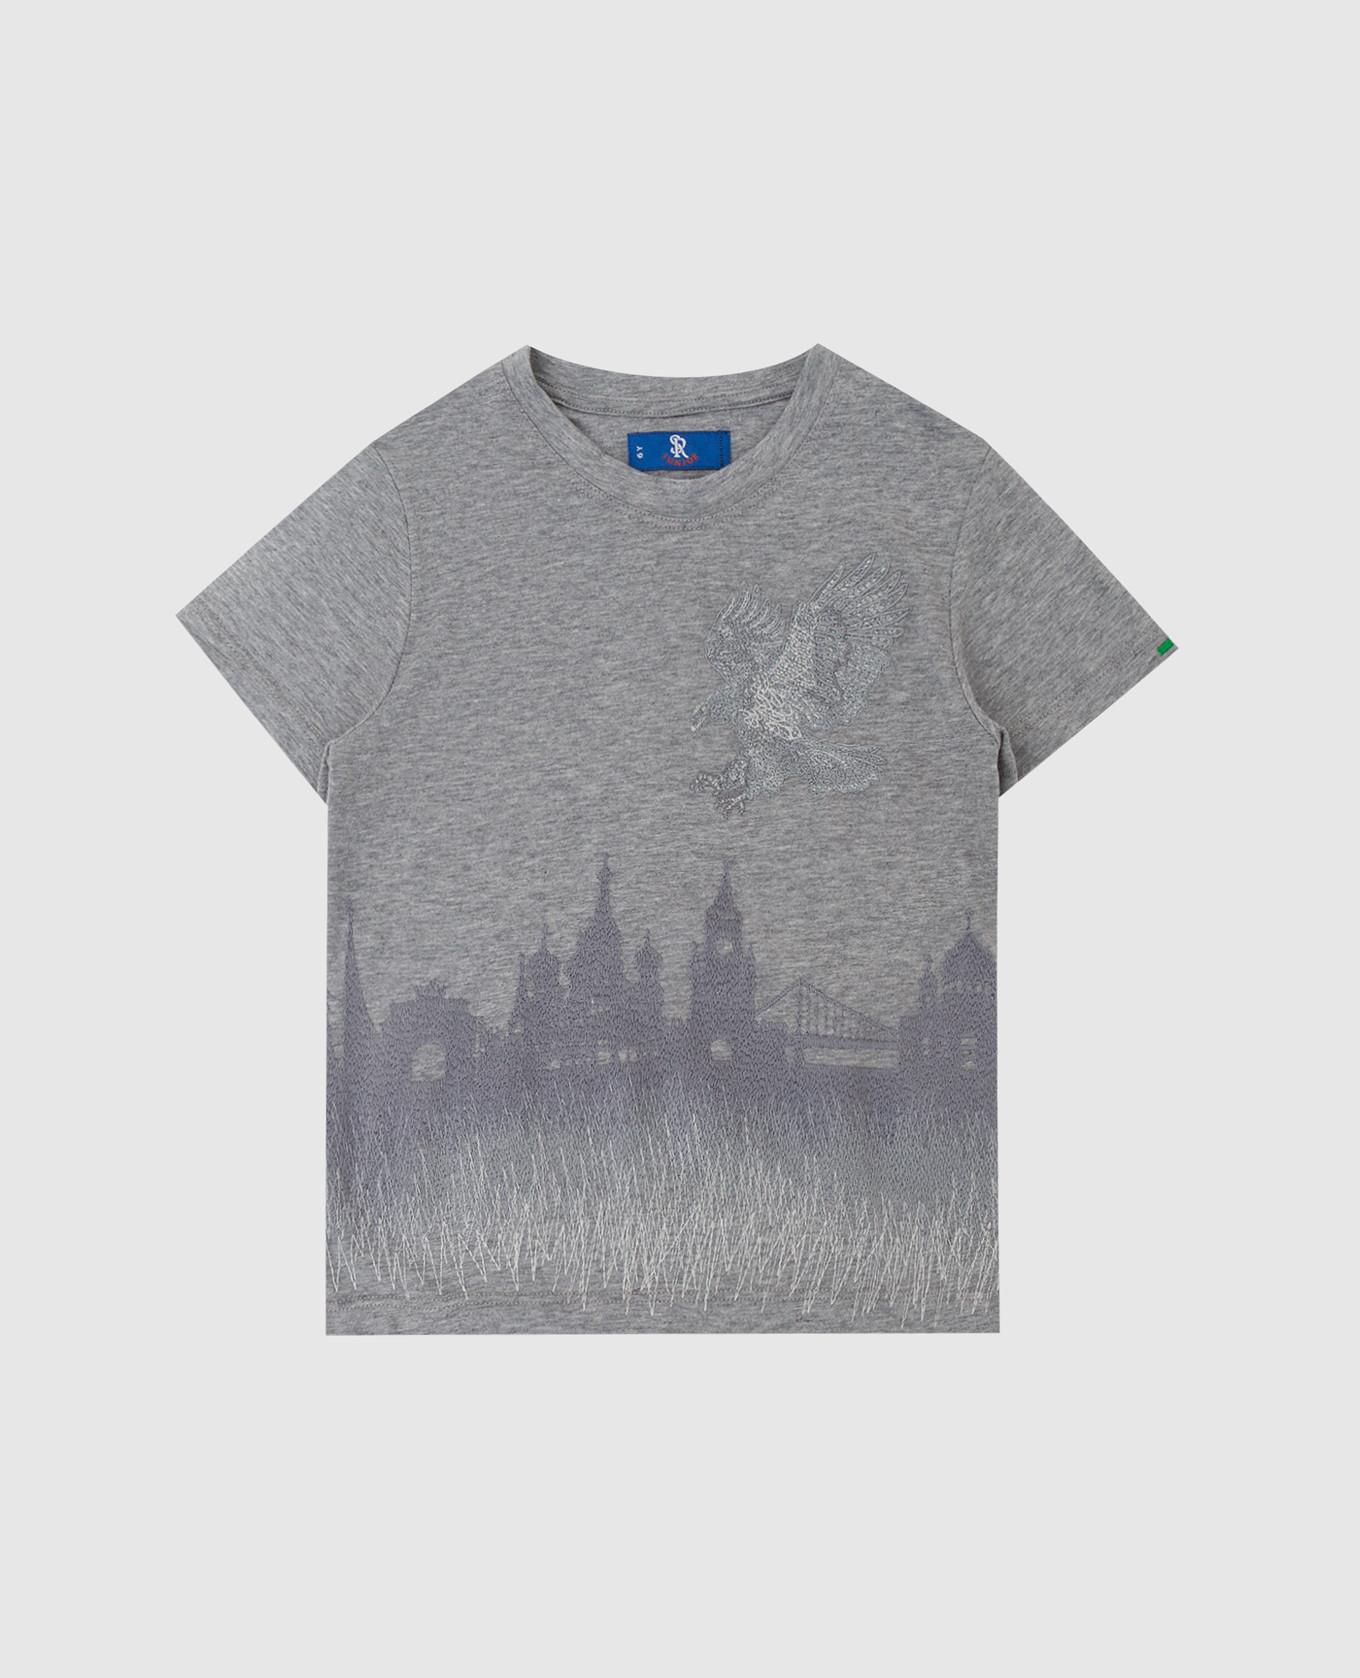 Children's gray t-shirt with embroidery